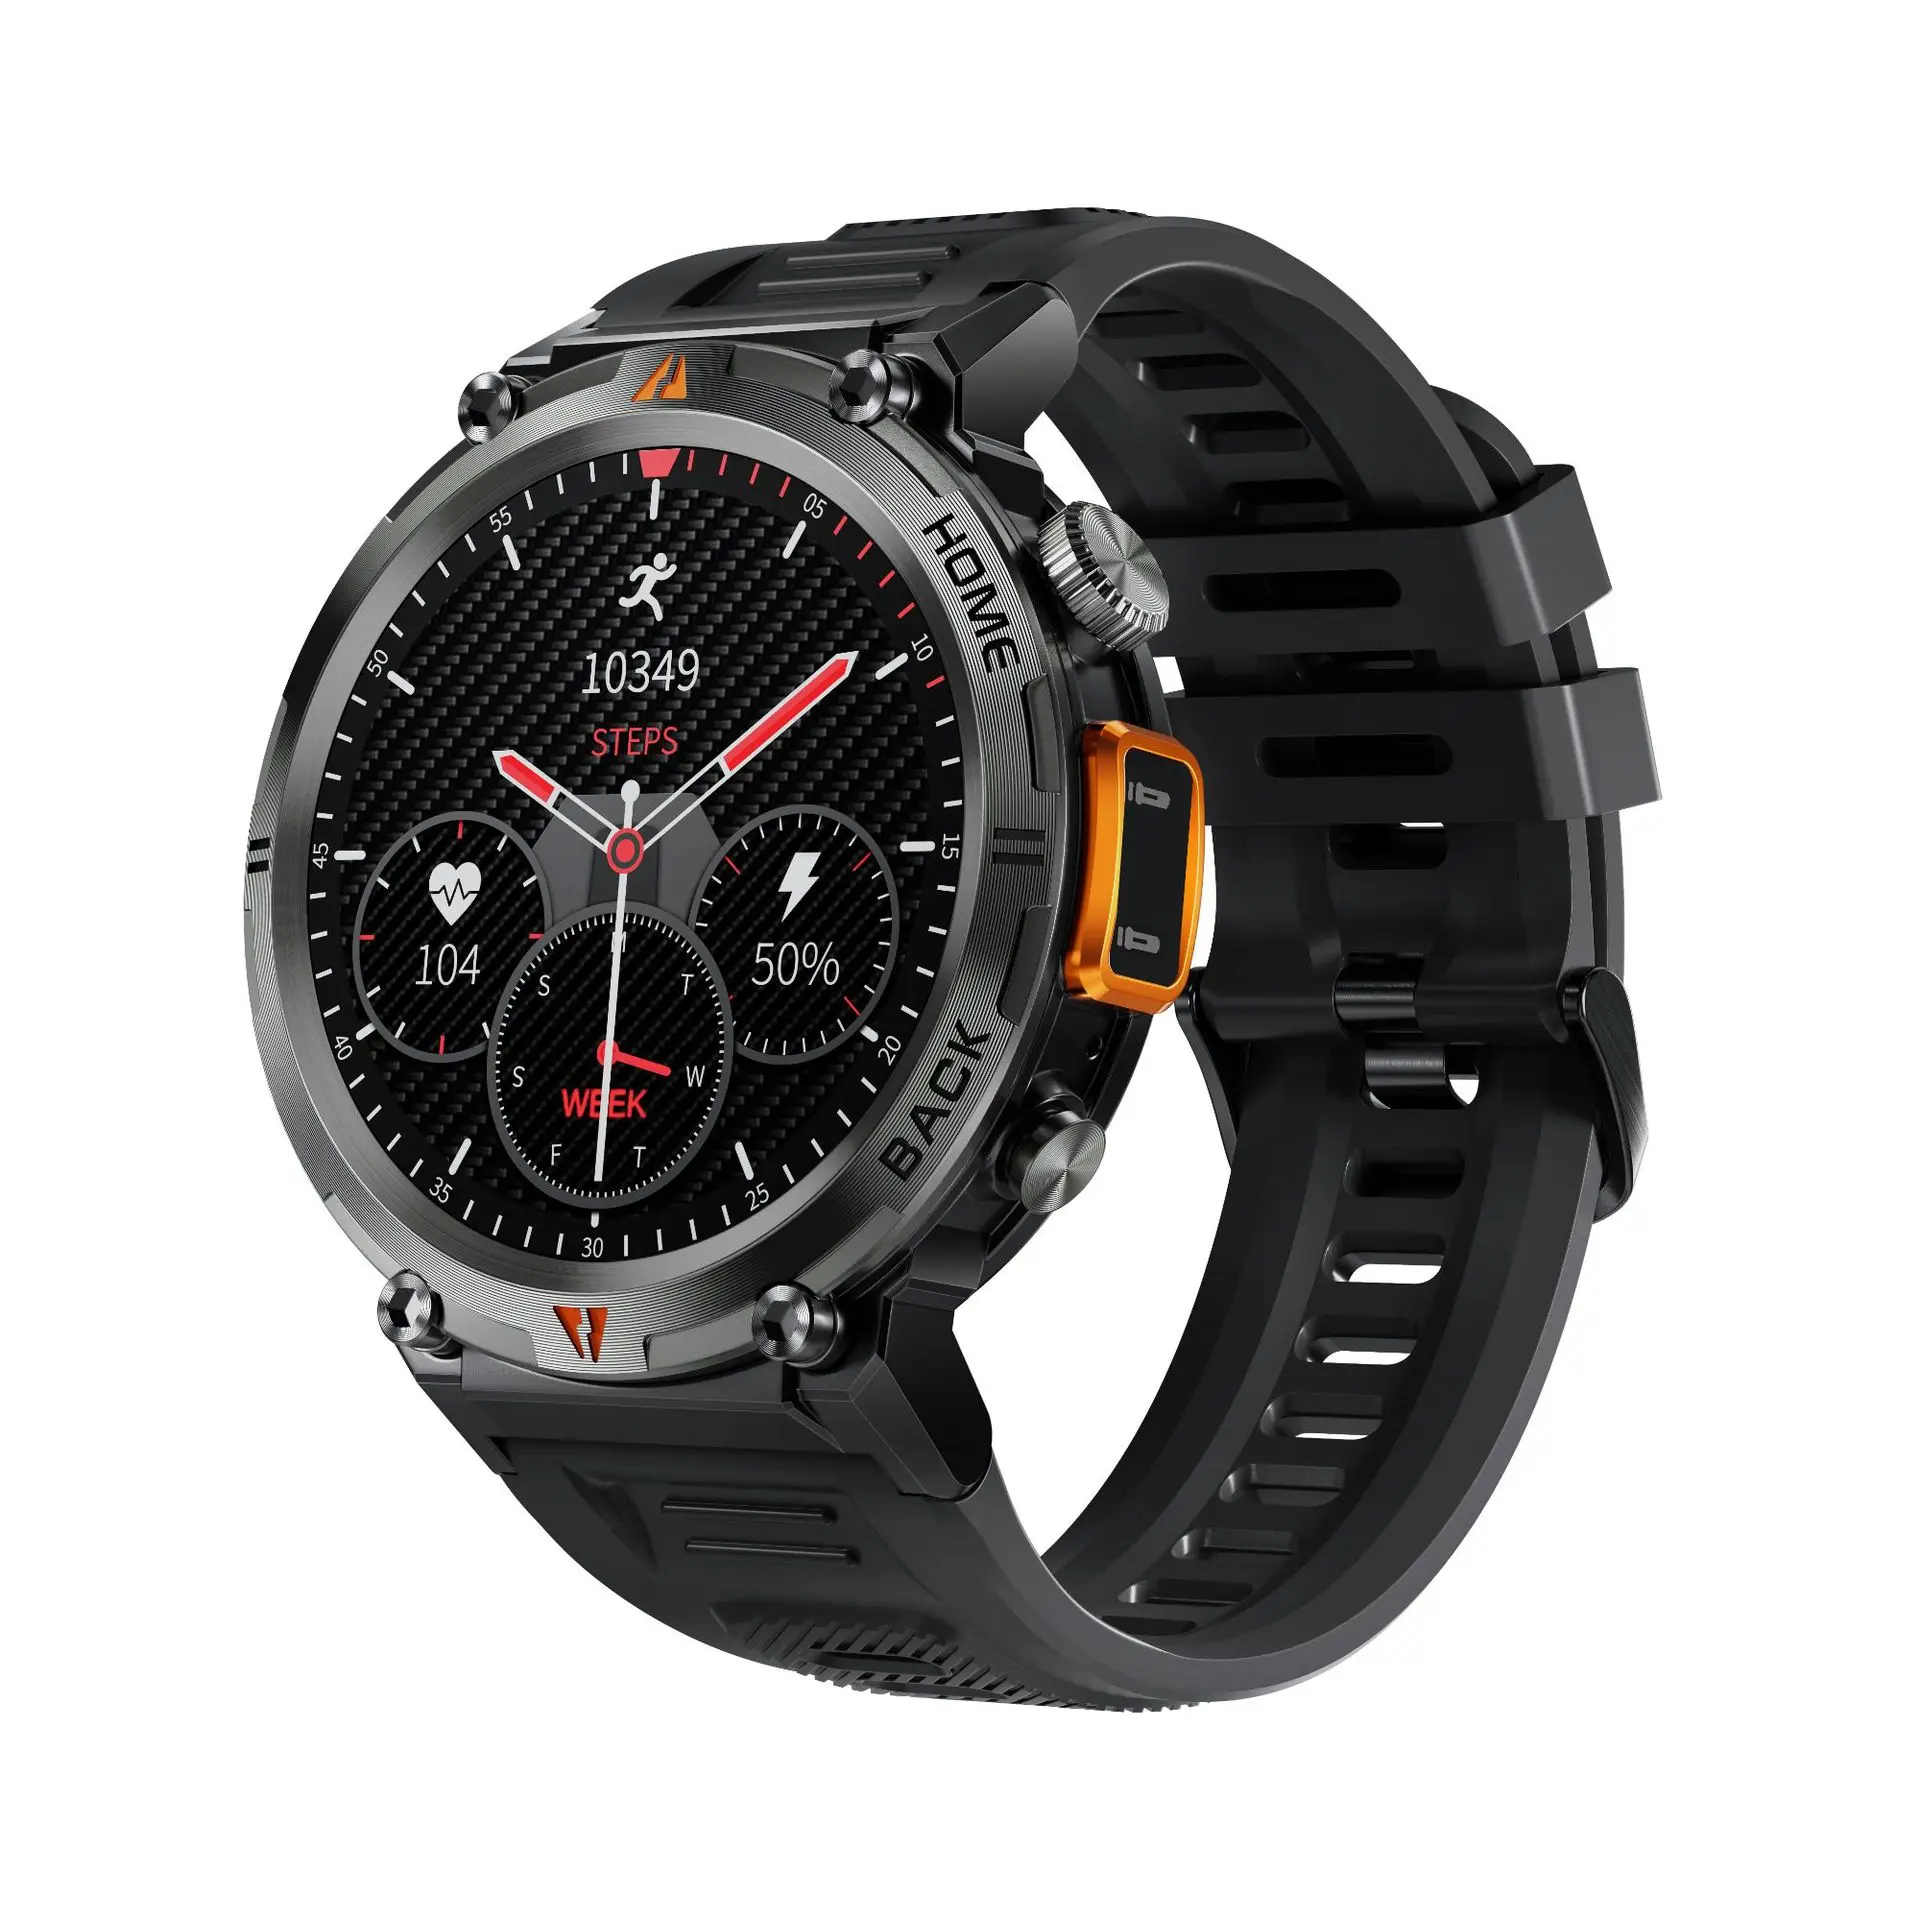 Original Outdoor Smart Watch For Men Bluetooth Call Health Monitoring Wi... - $73.06